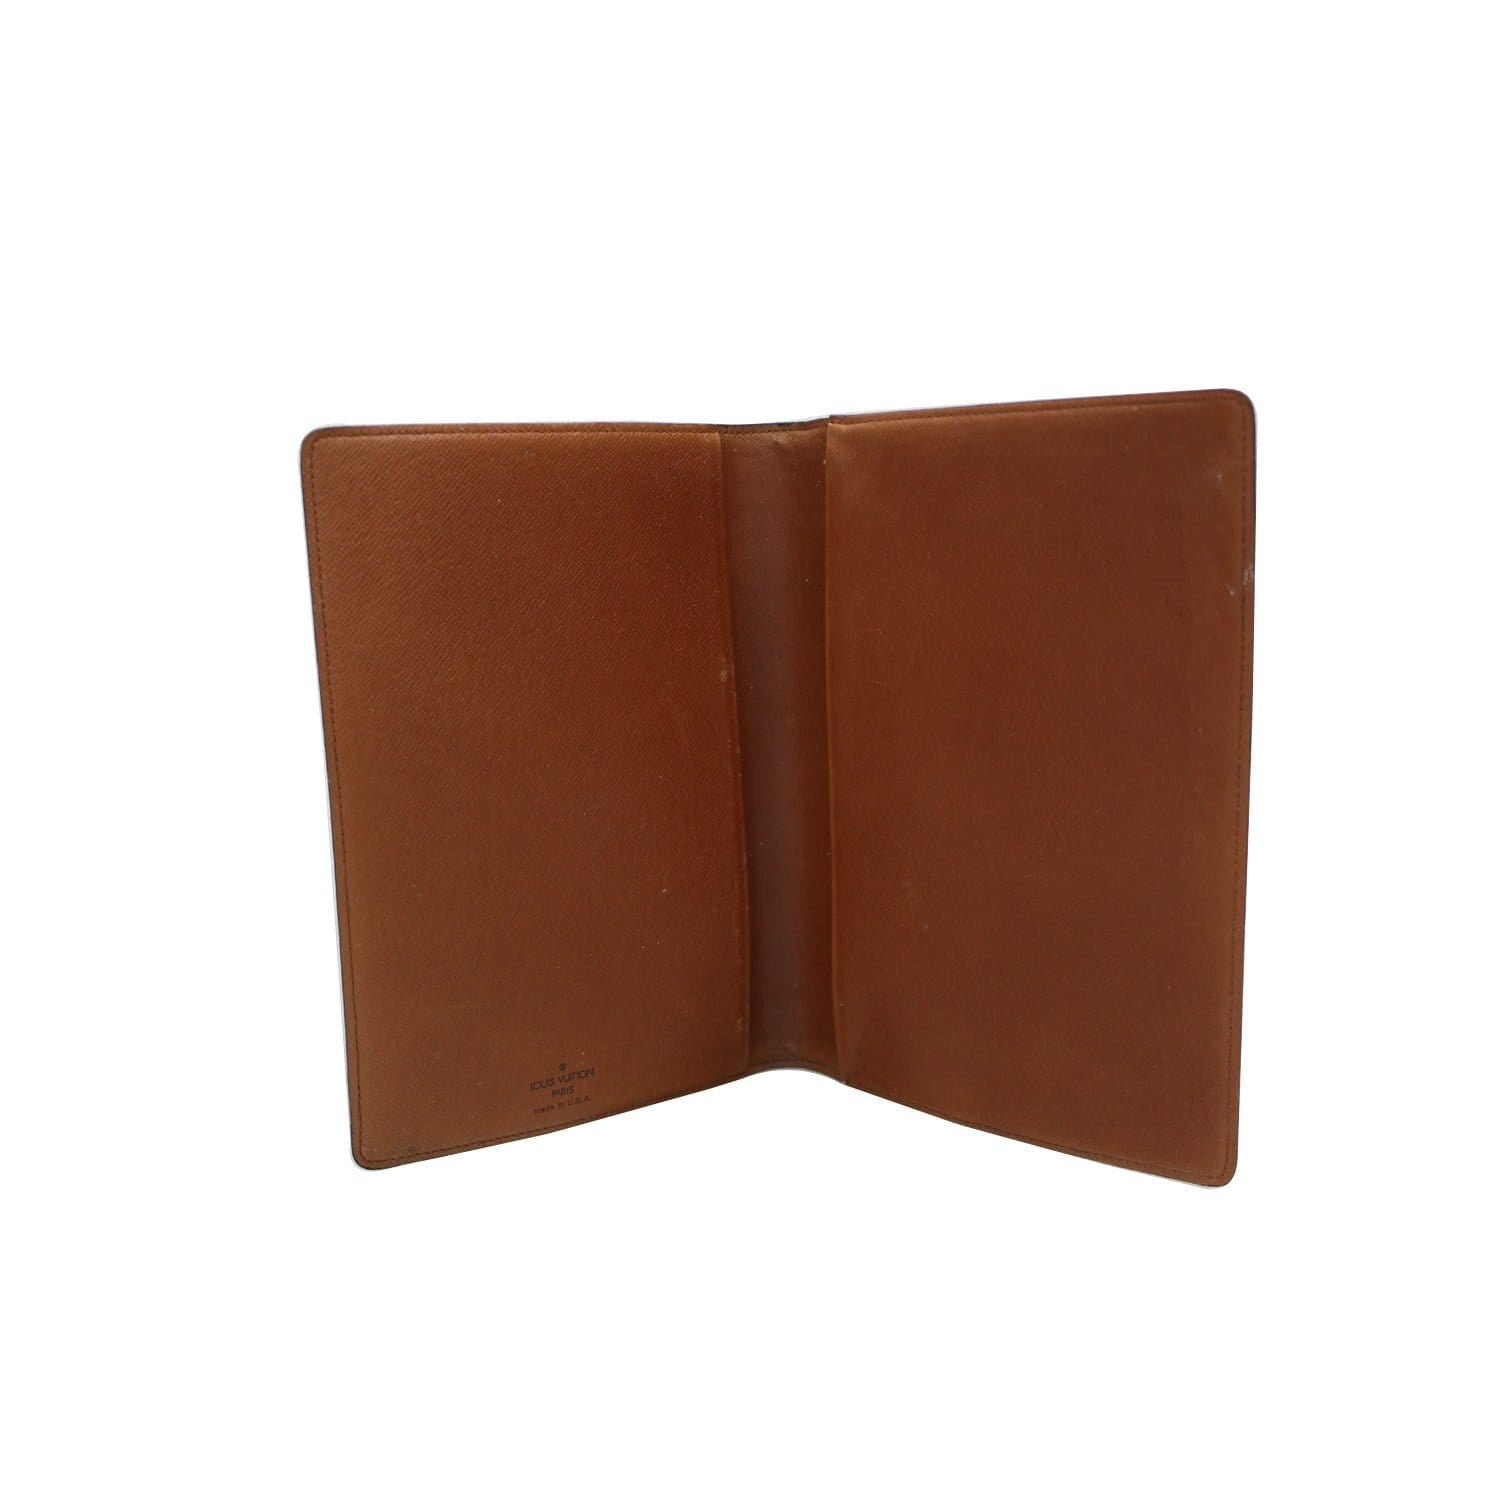 Louis Vuitton Monogram Small Notebook Cover - Brown Travel, Accessories -  LOU781897